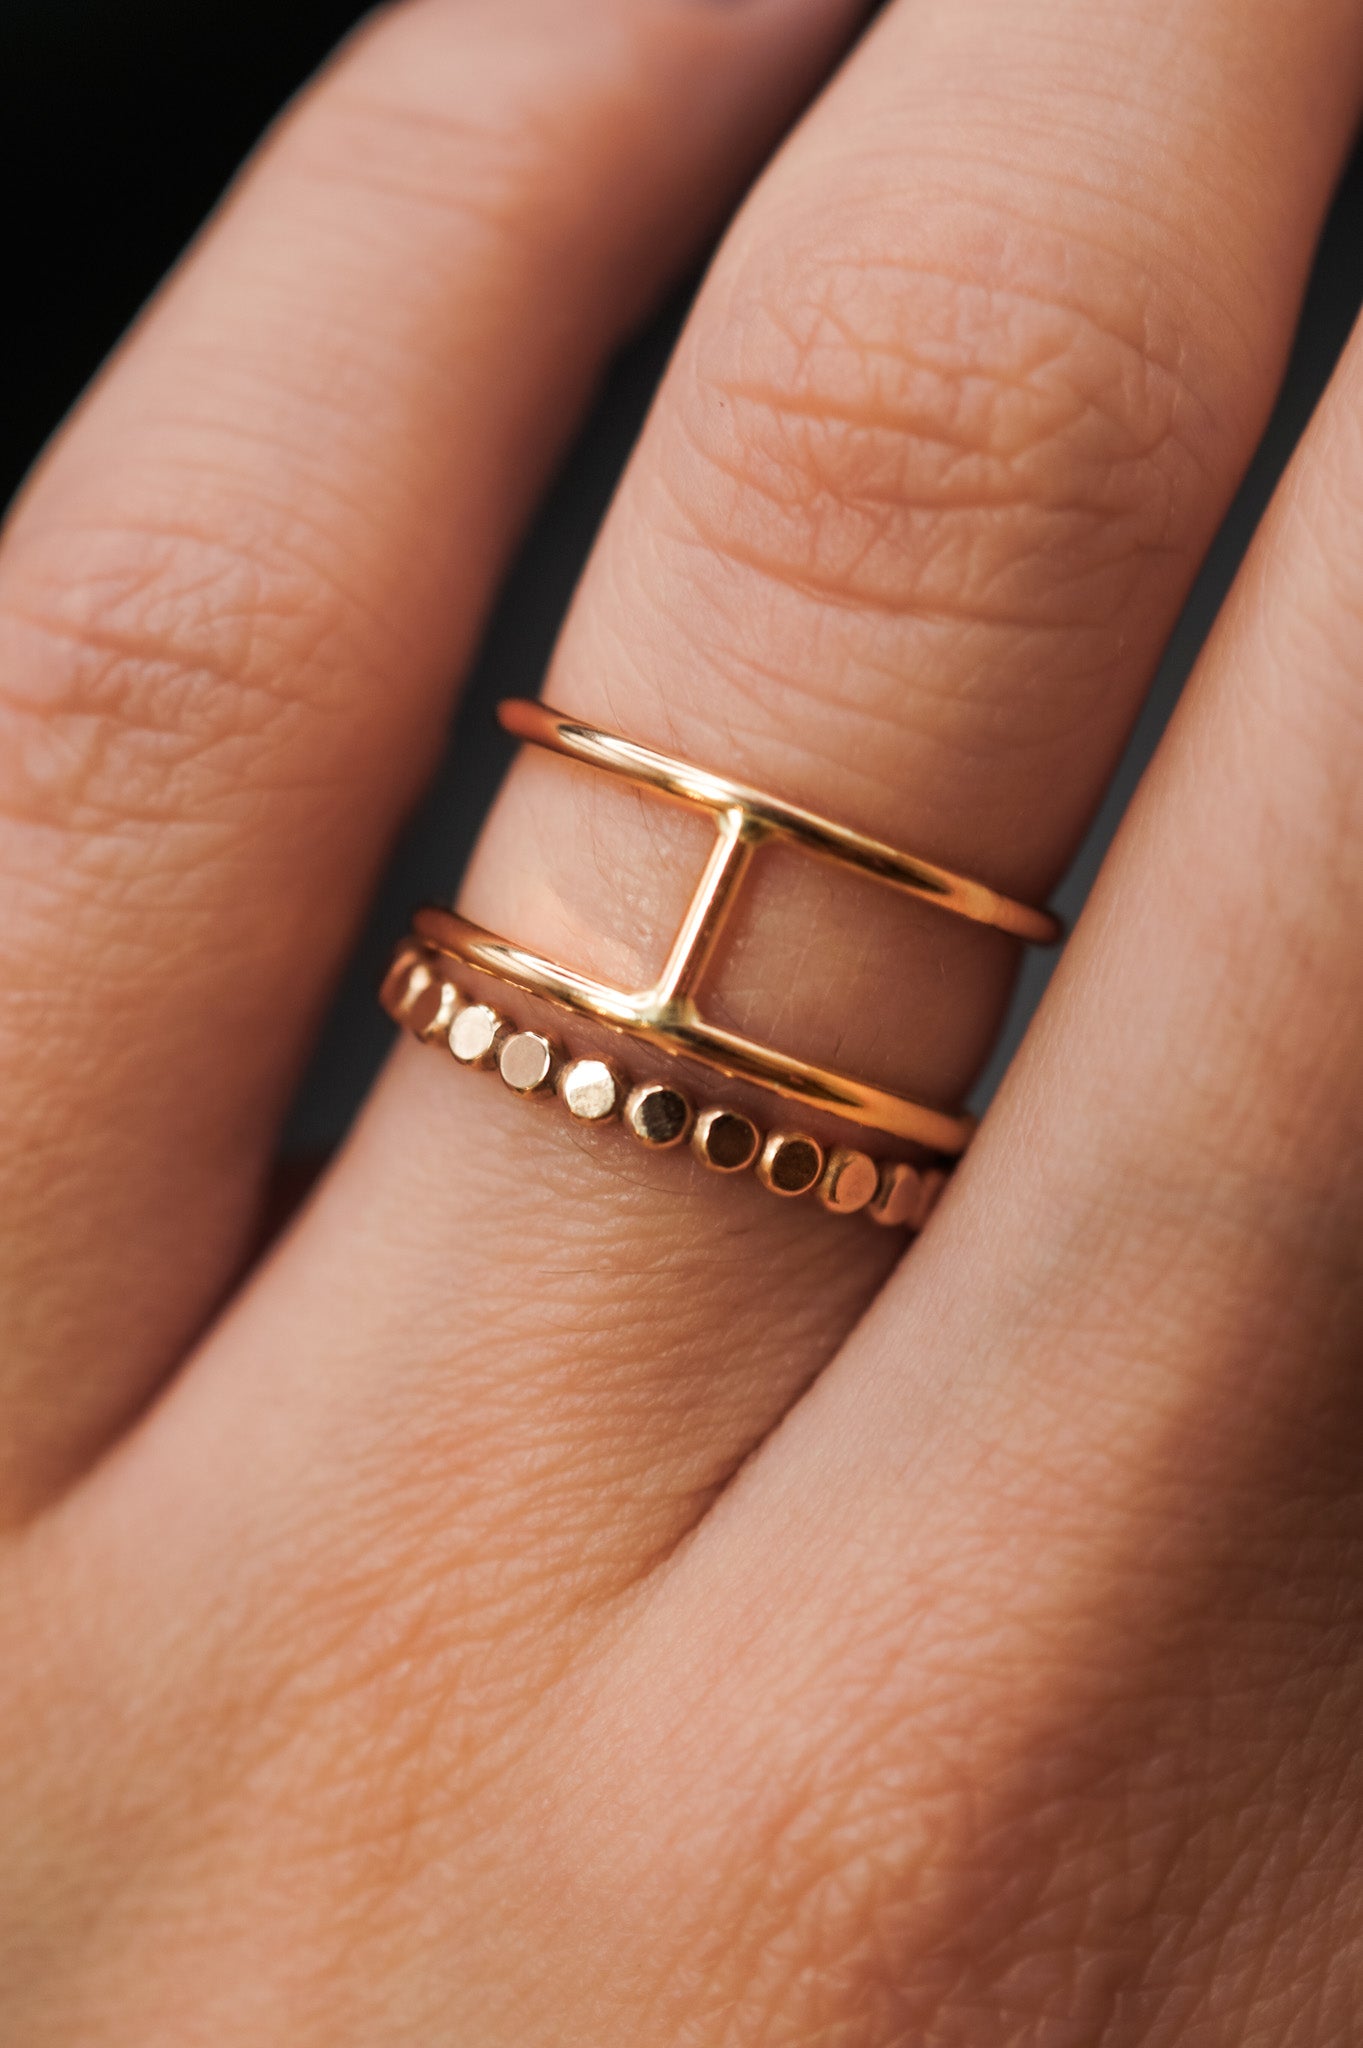 Mini Bead and Cage Ring Set of 2 Stacking Rings, Gold Fill or Rose Gold Fill